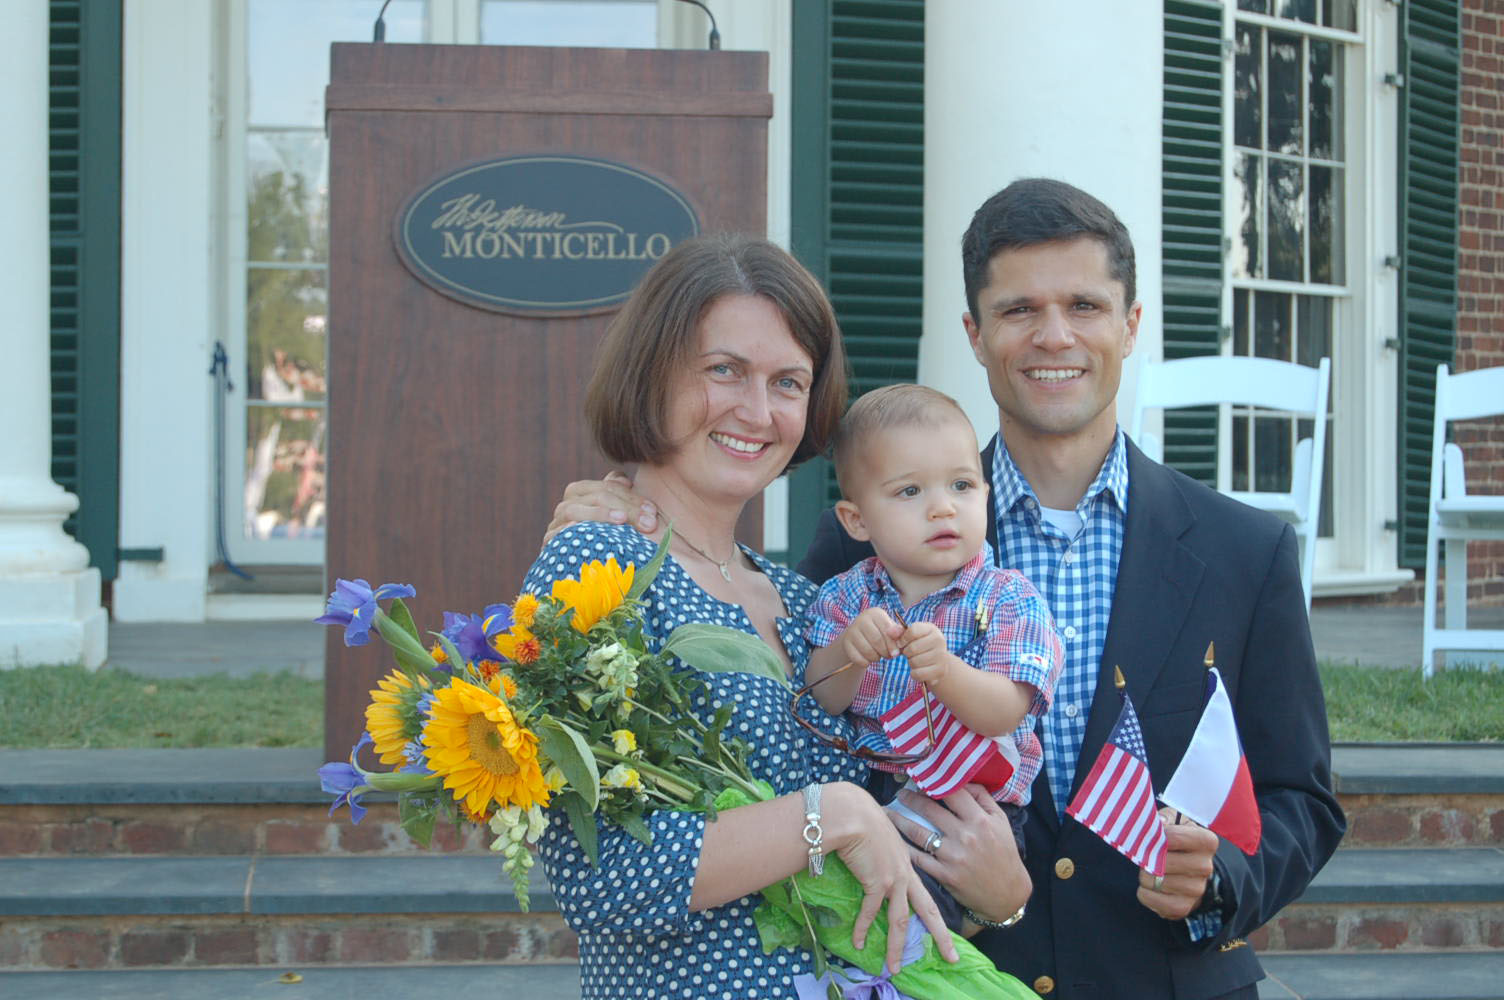 Ladislava "Ladi" Carr,  Sean Carr, her son, and Sebastian Dabney Carr stand together holding American flags during a Naturalization ceremony